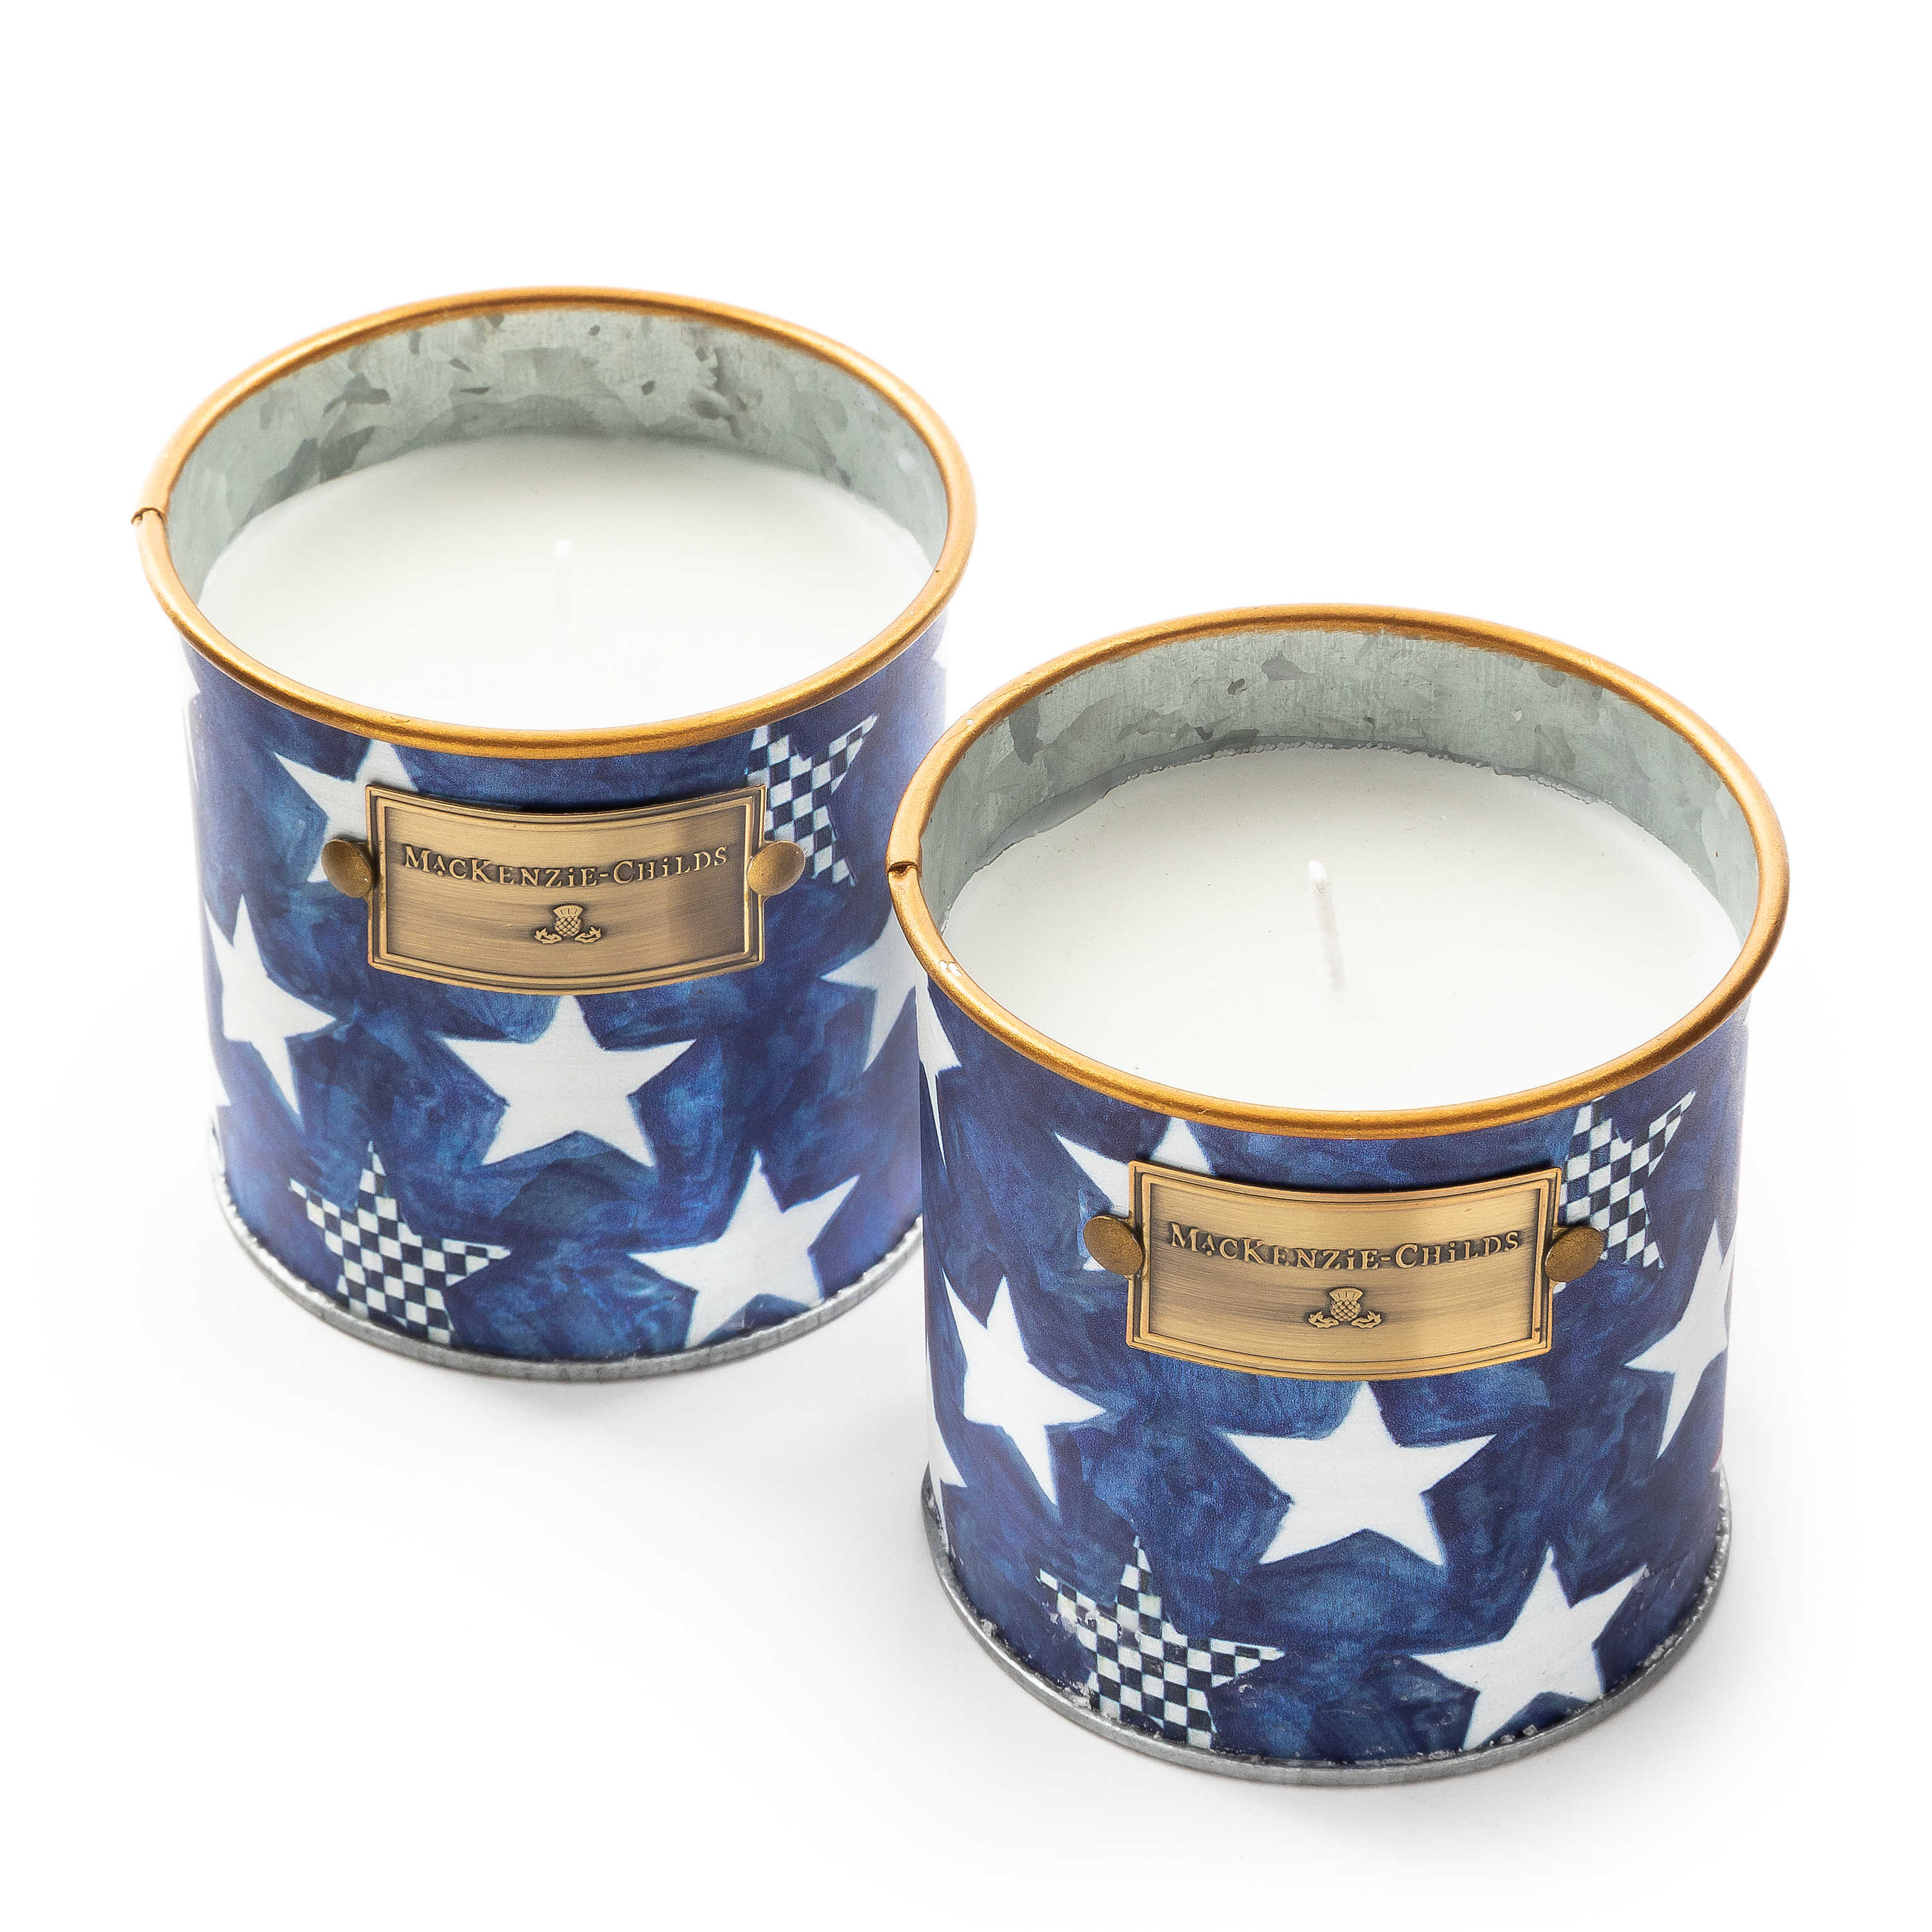 Royal Star Small Citronella Candles, Set of 2 mackenzie-childs Panama 0